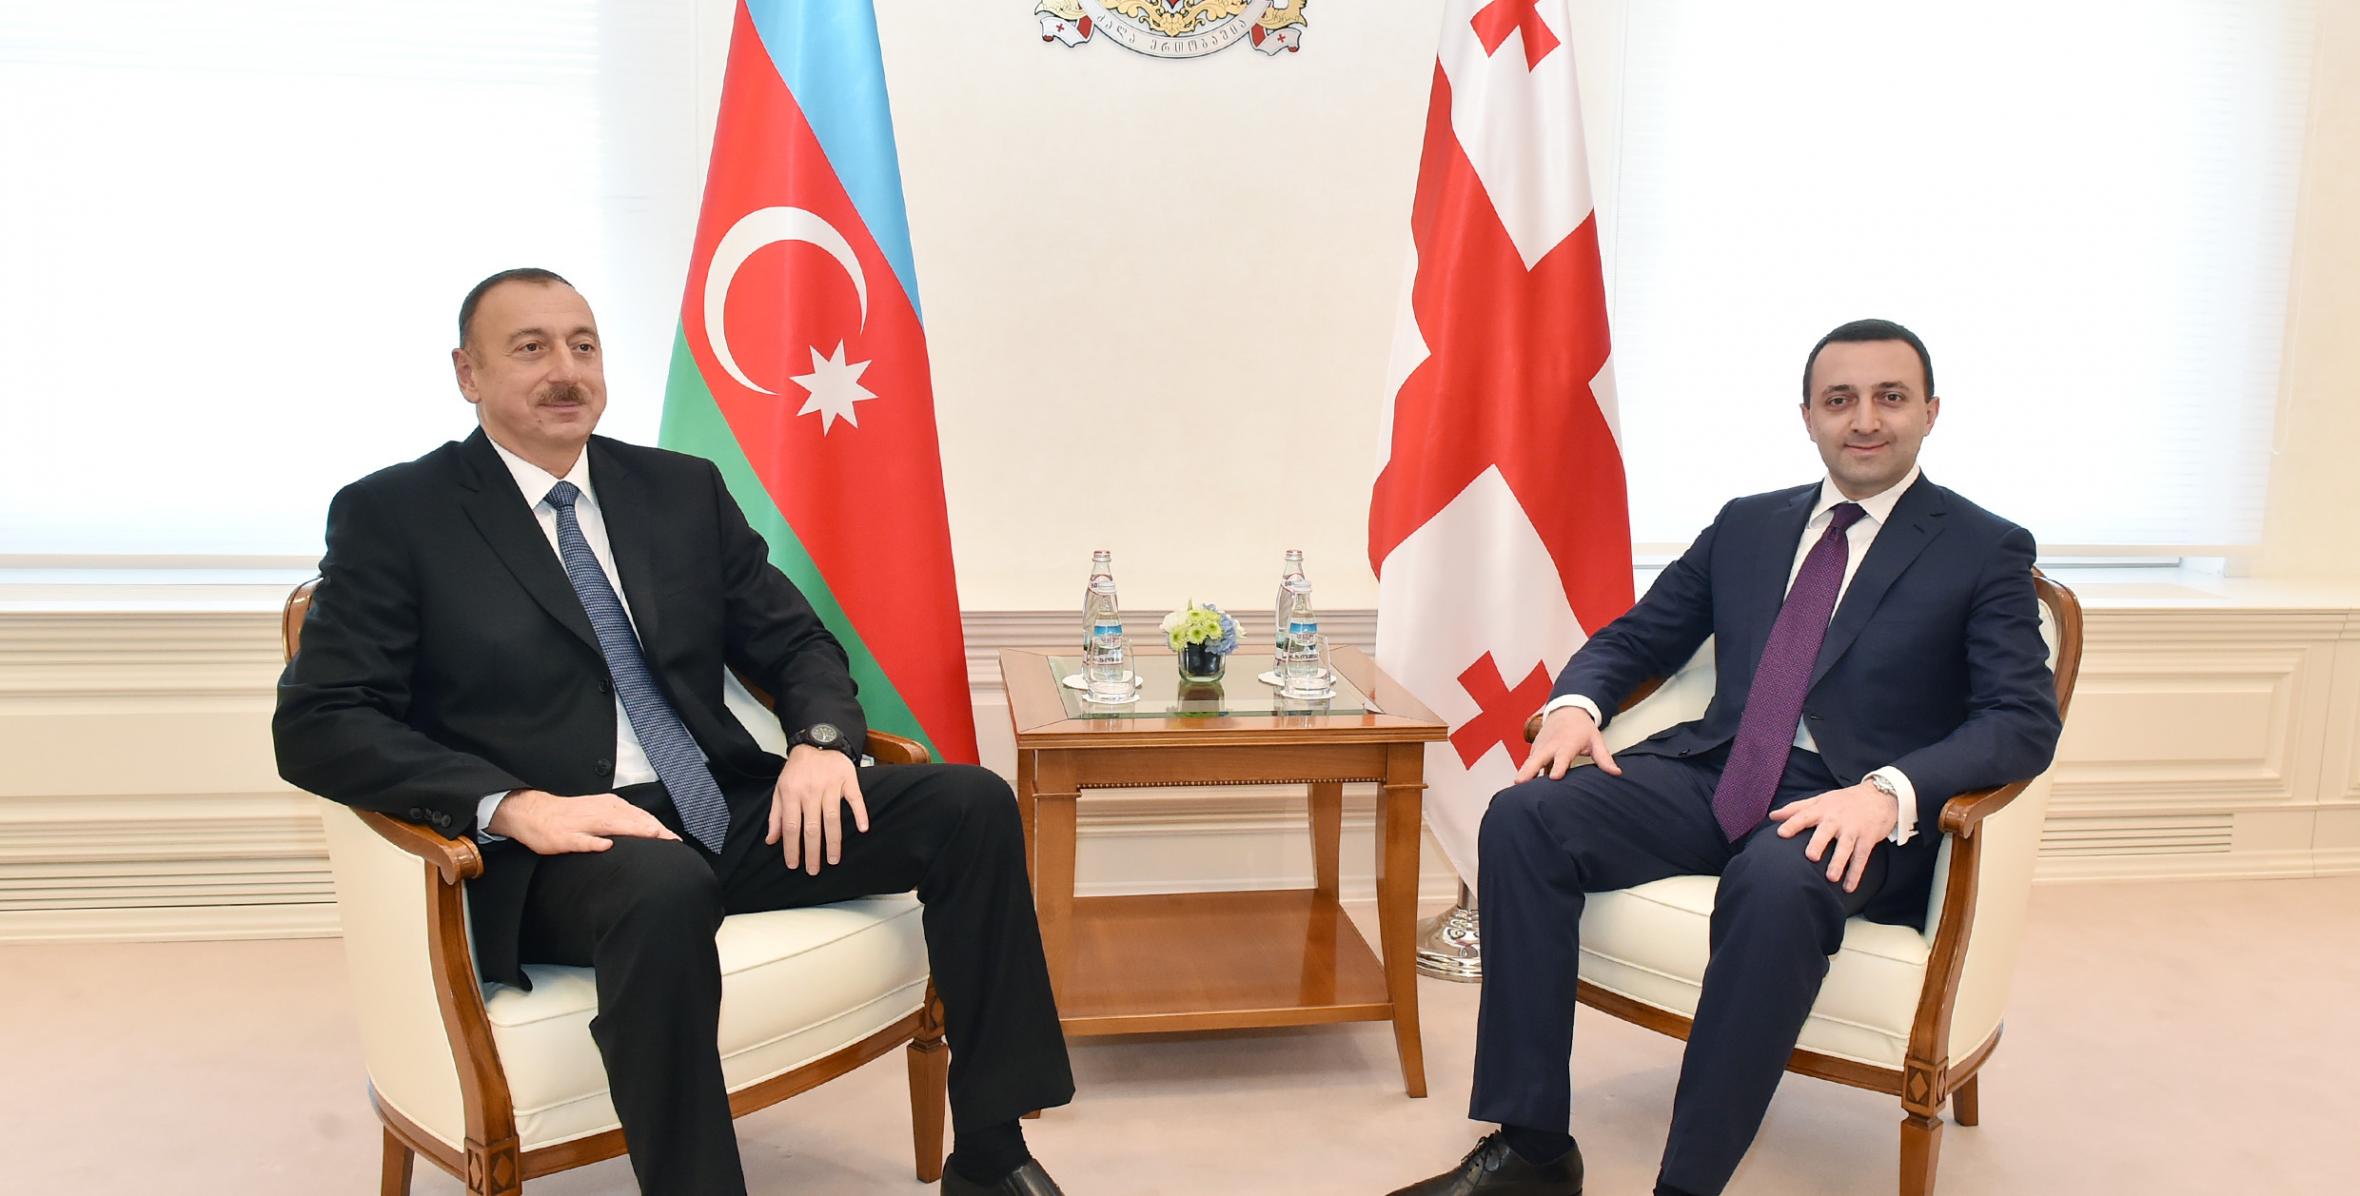 Ilham Aliyev and the Georgian Prime Minister held a one-on-one meeting